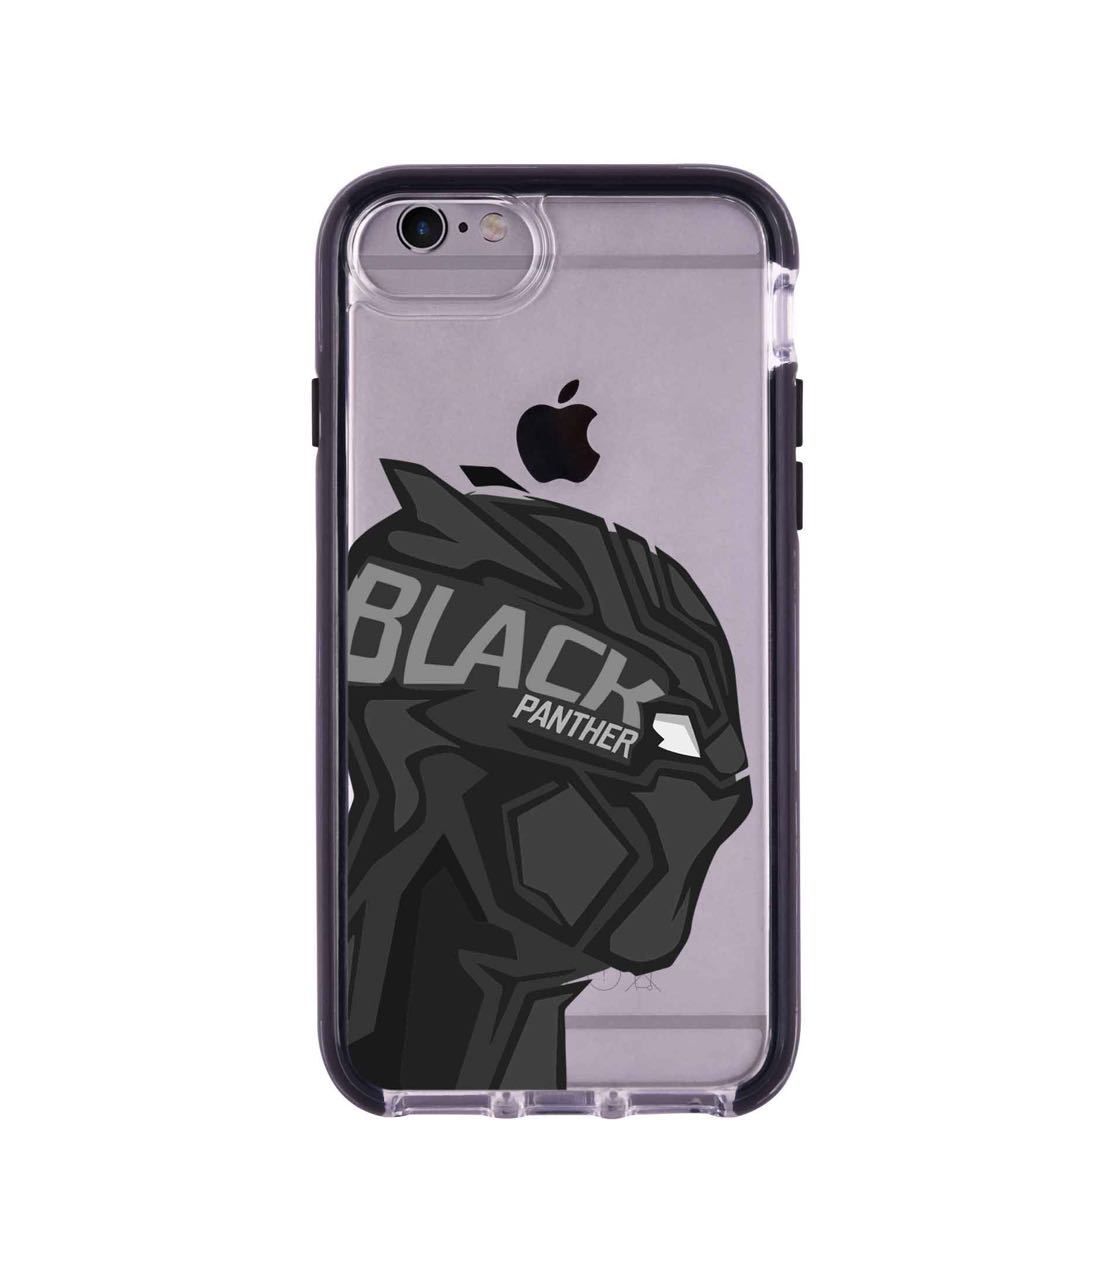 Black Panther Art - Extreme Phone Case for iPhone 6 Plus